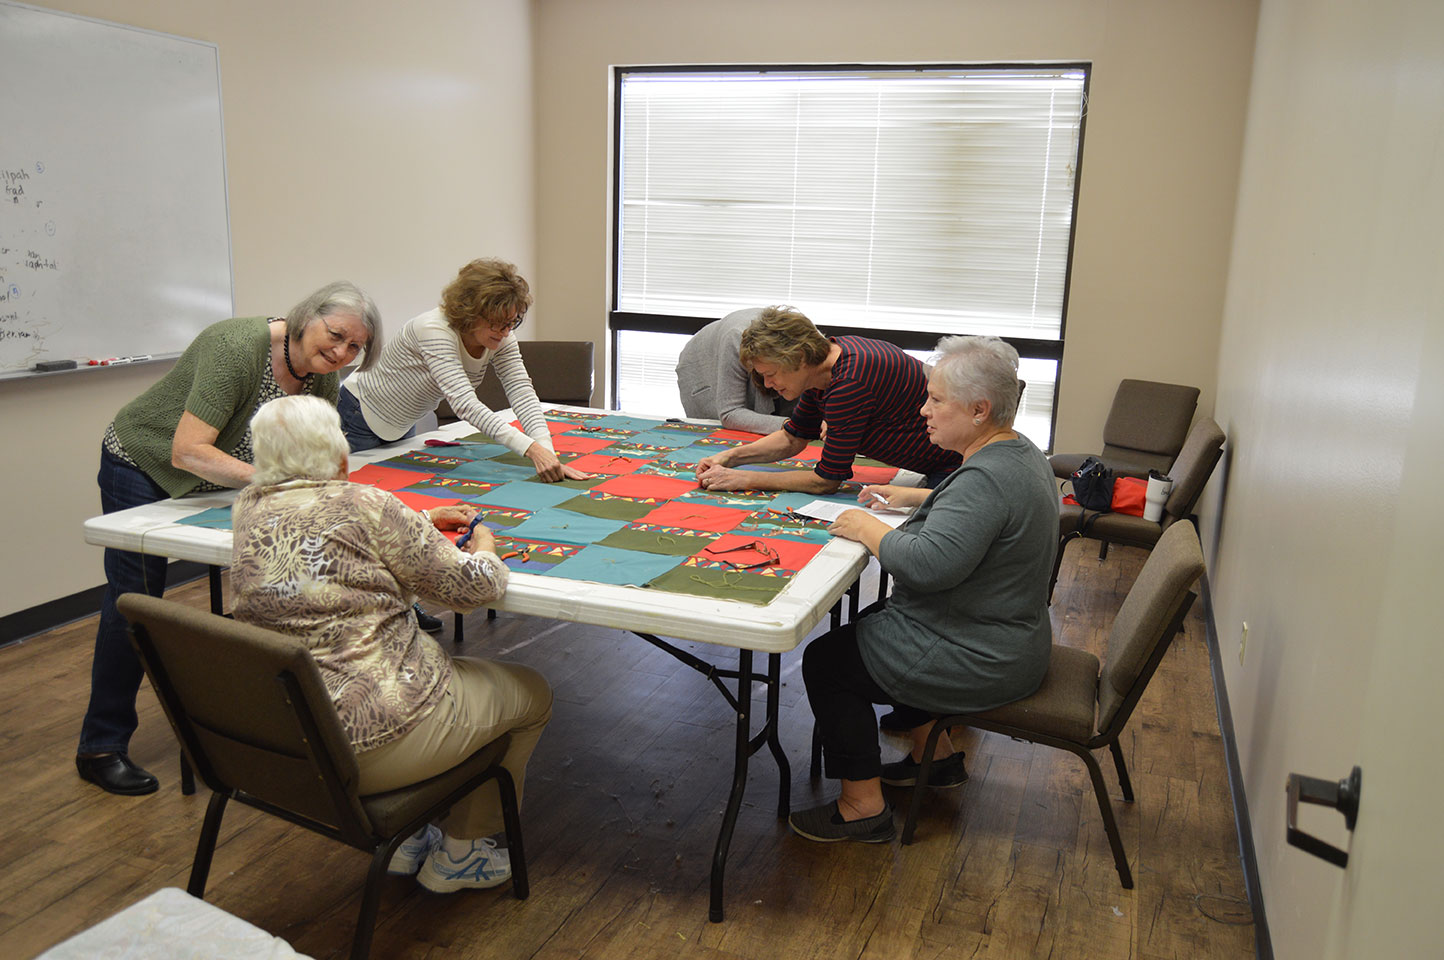 Women sitting and making a quilt.